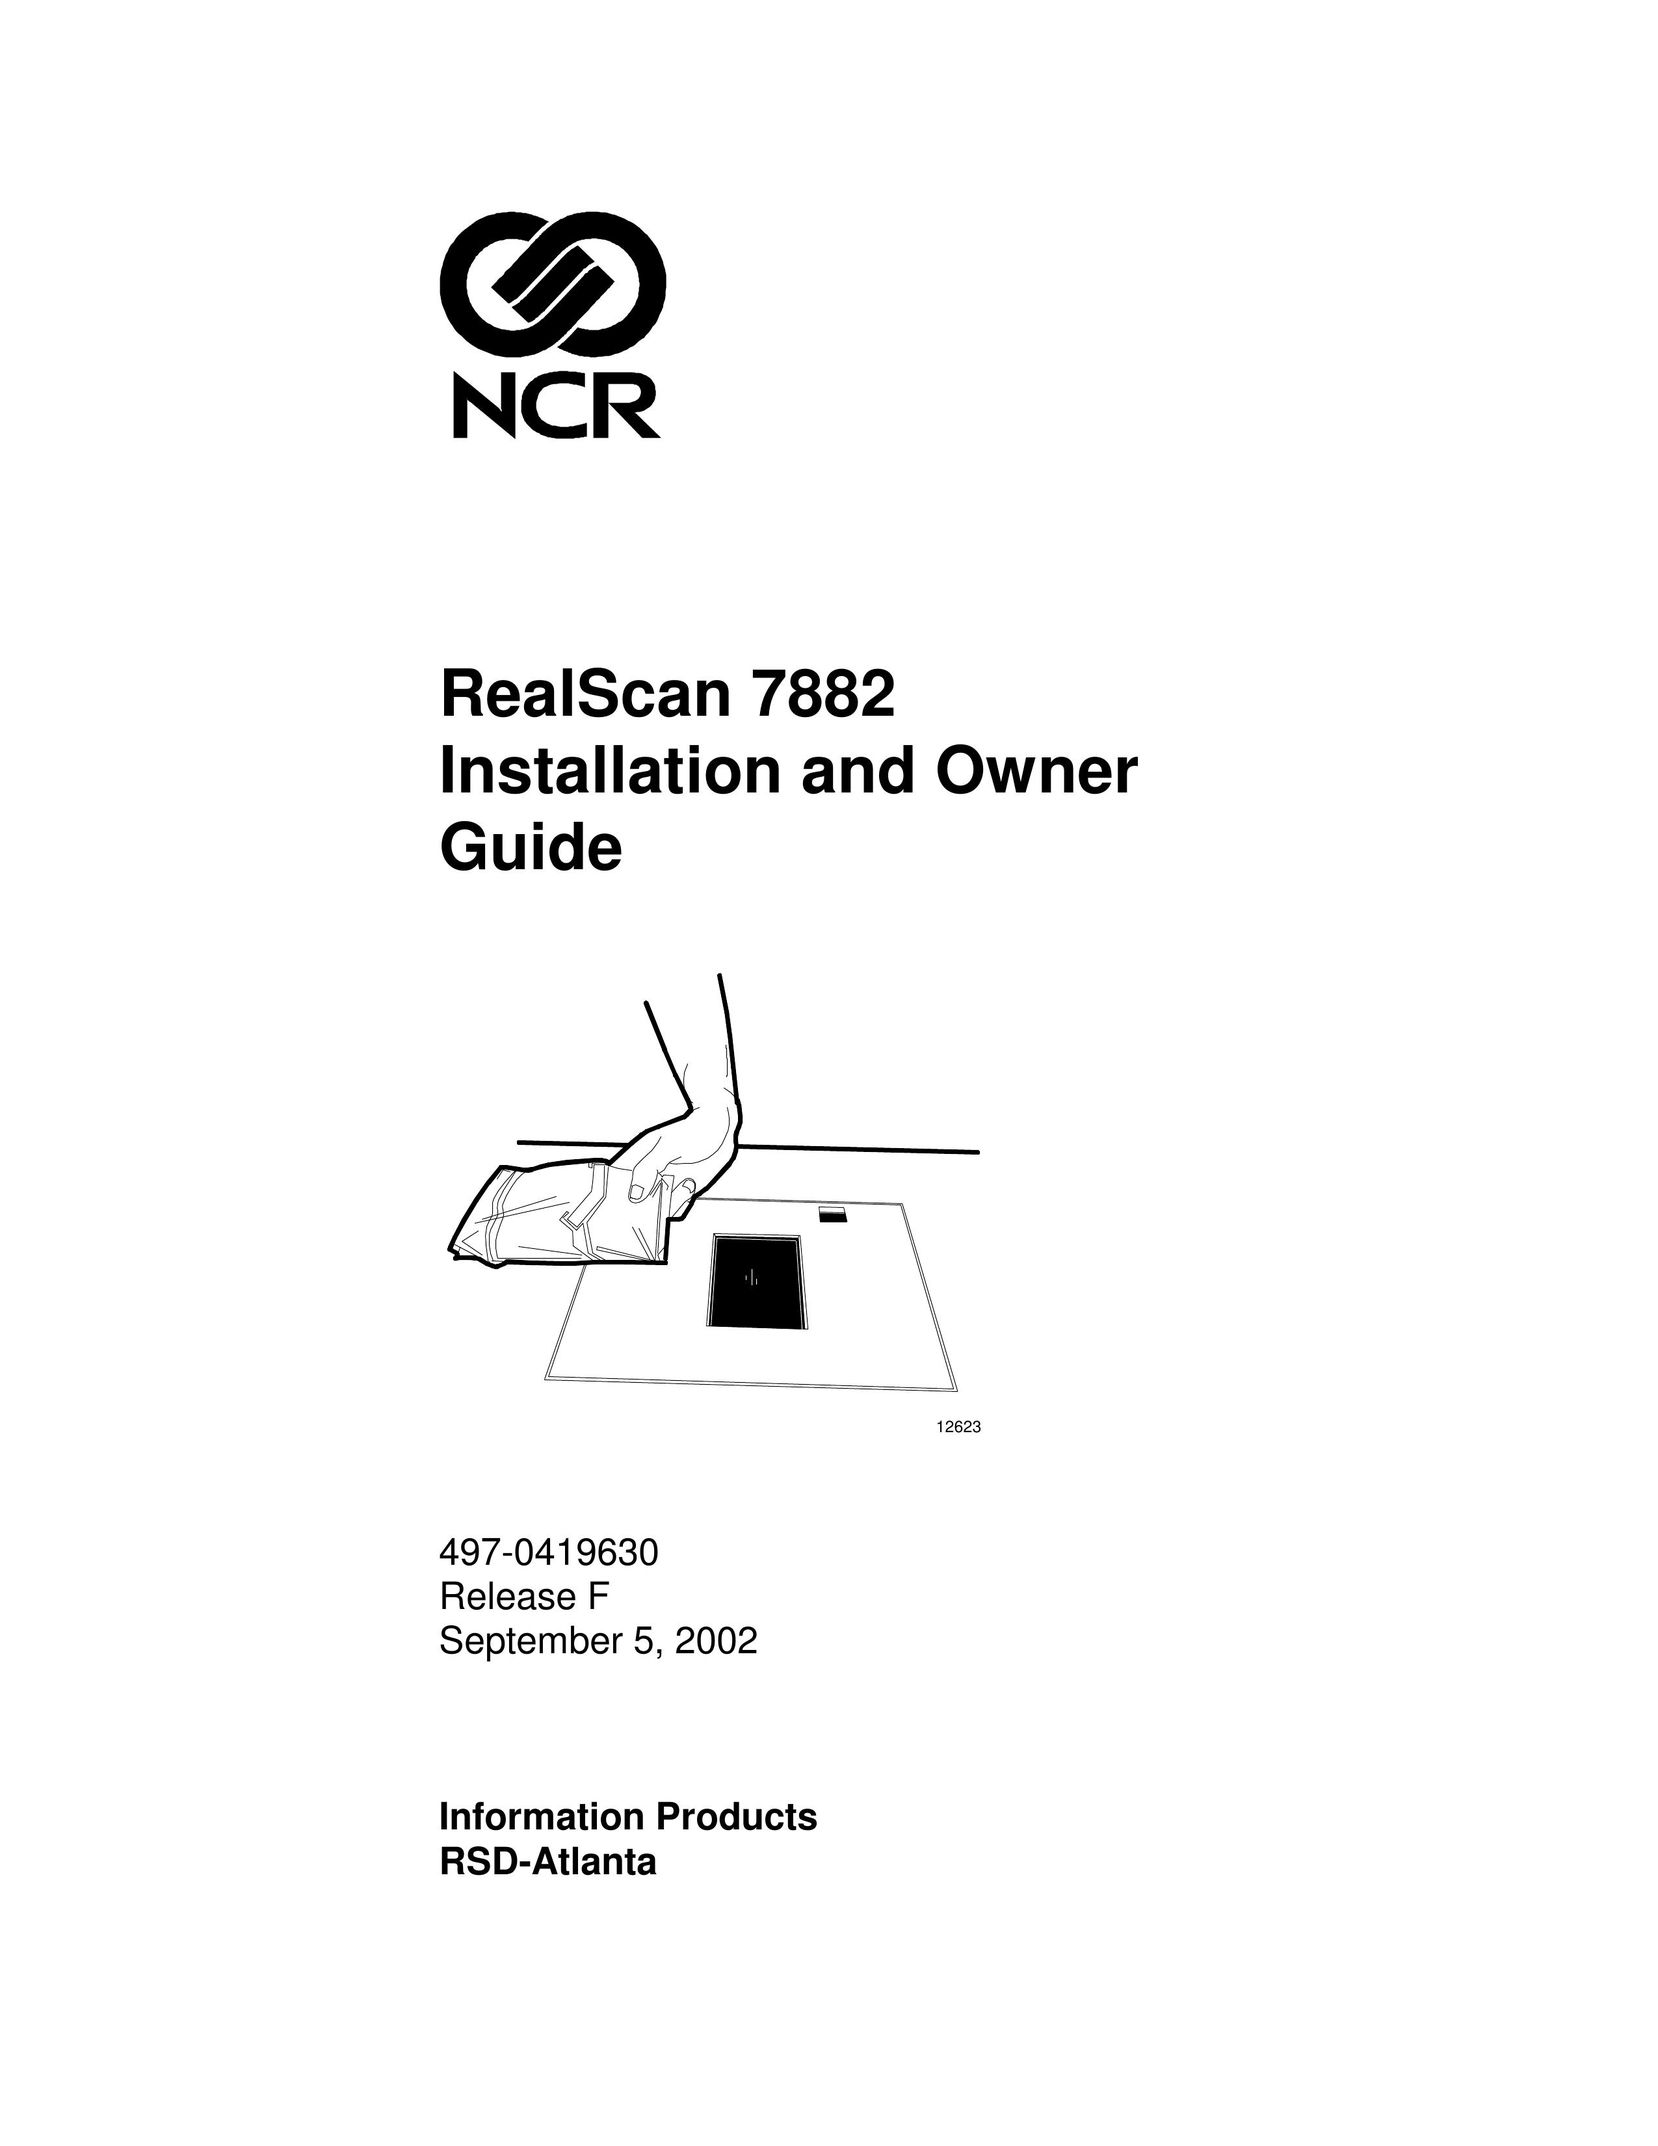 NCR 7882 All in One Printer User Manual